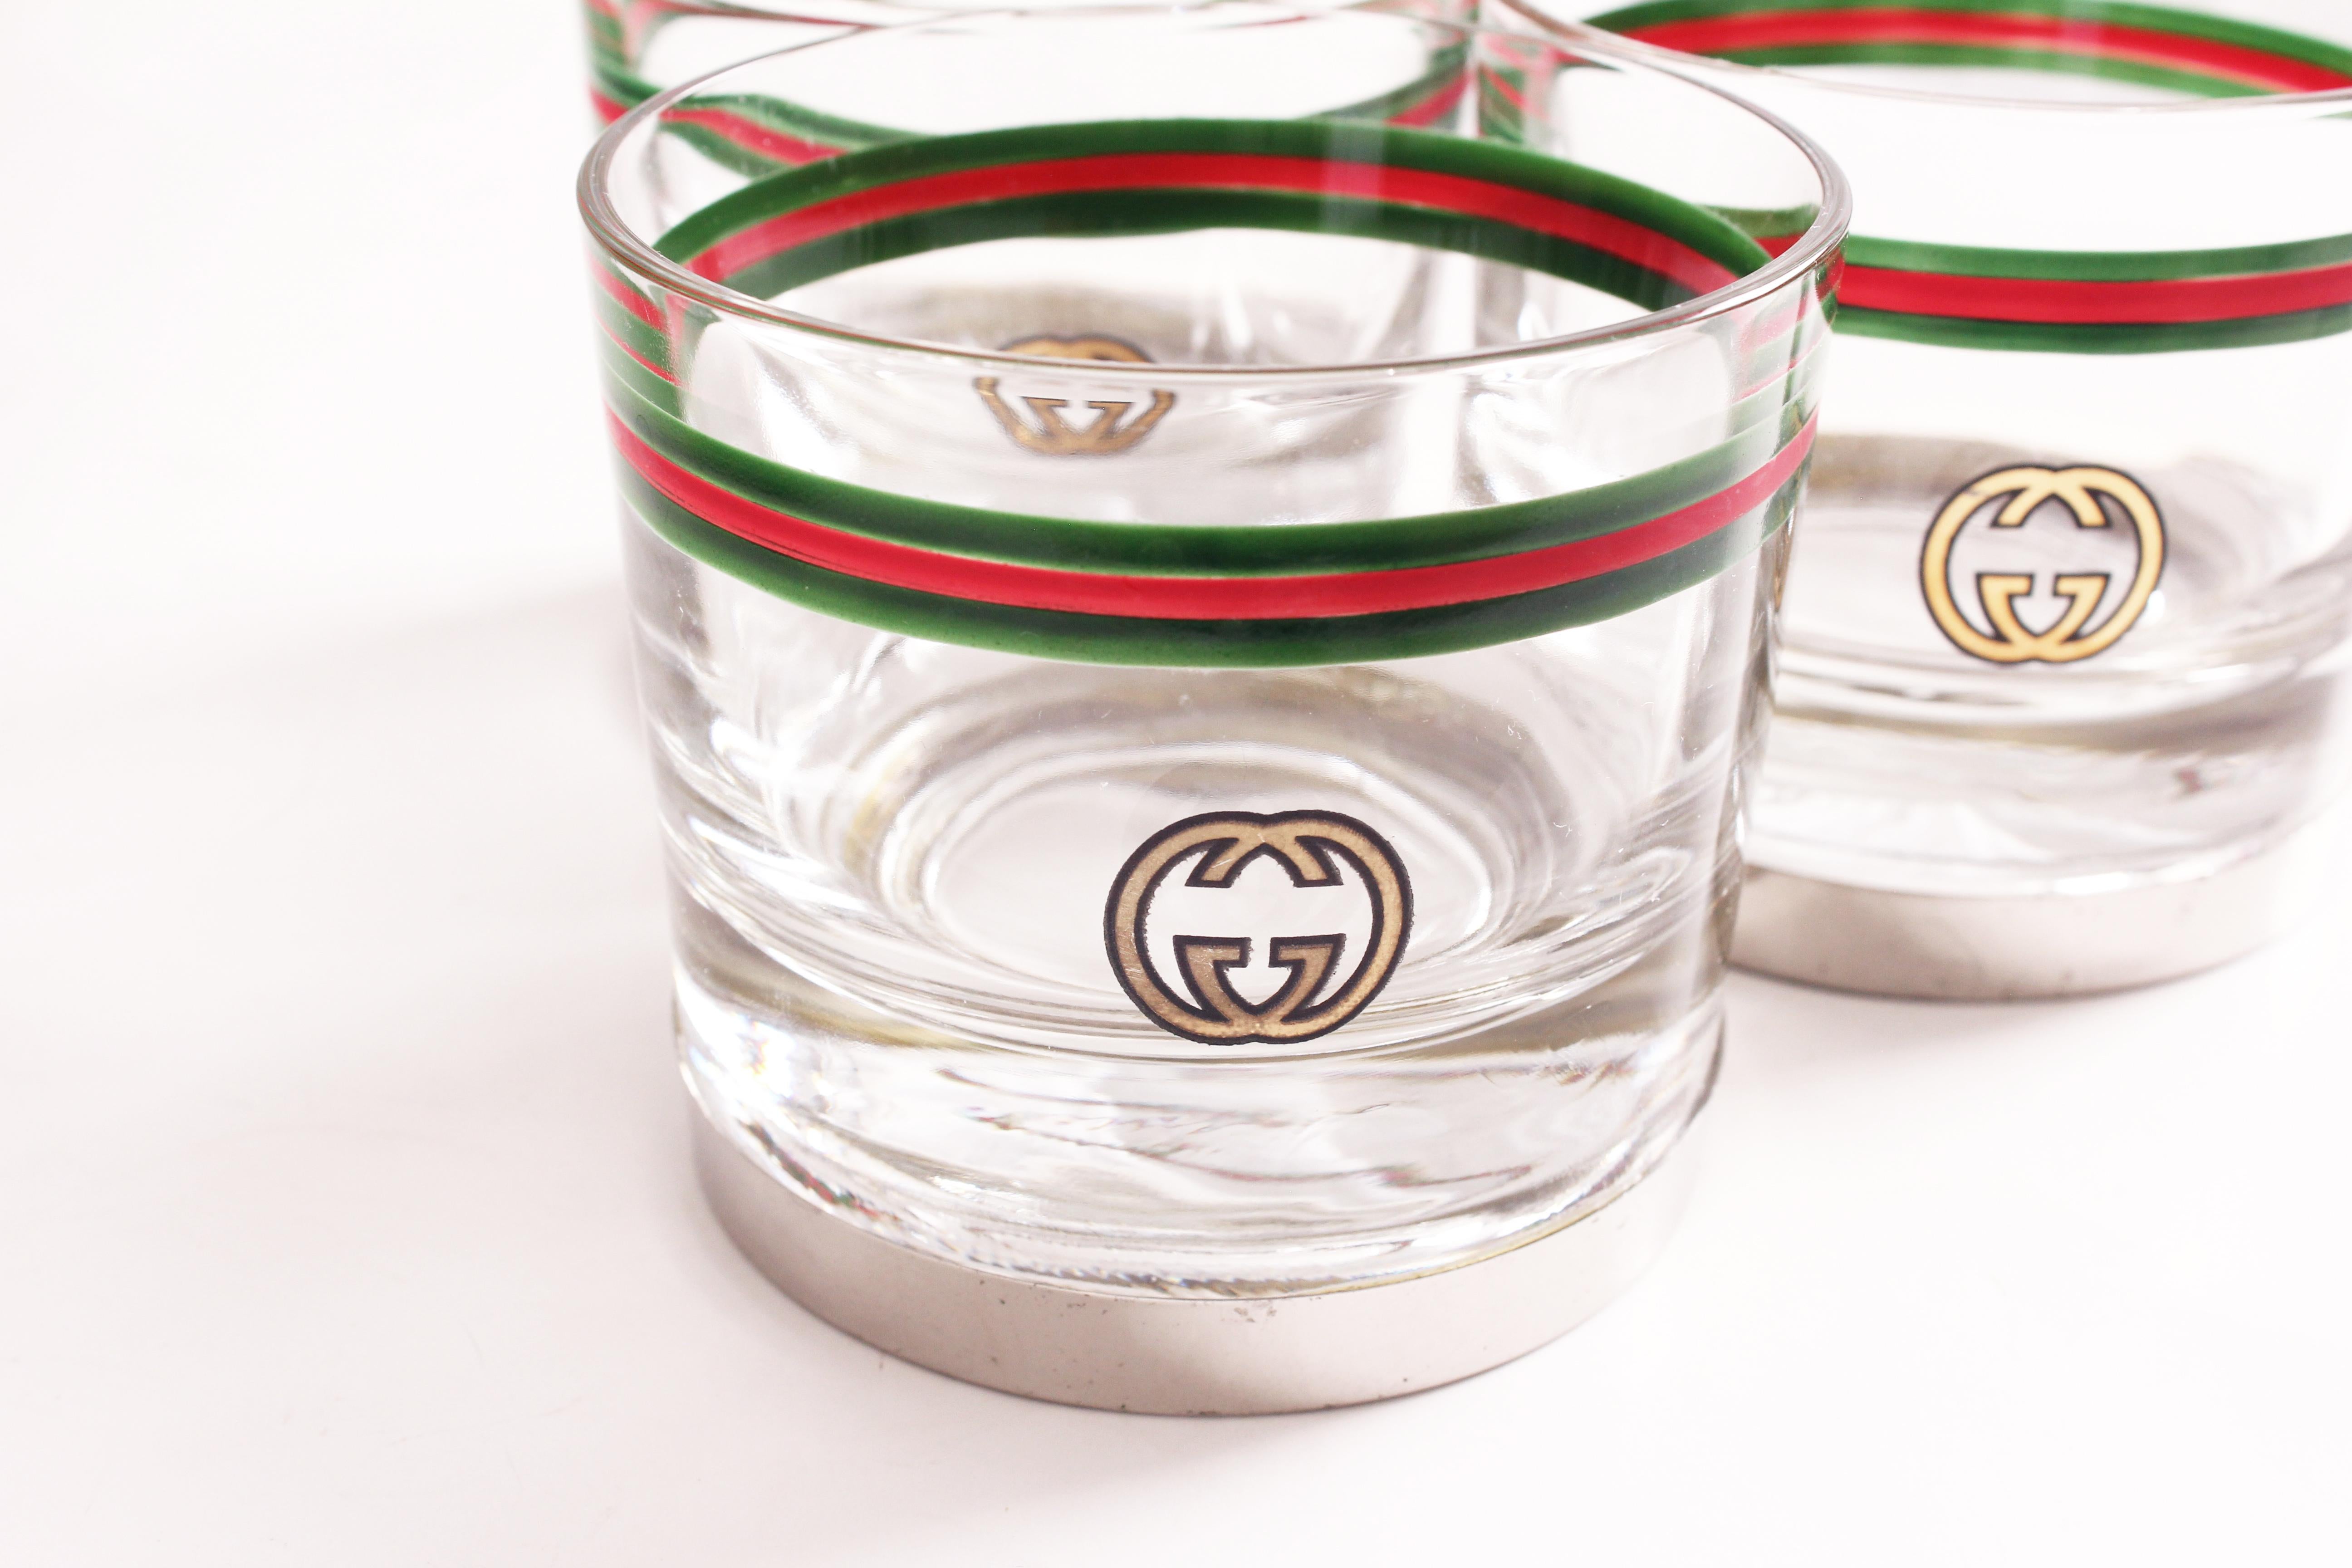 Rare Gucci Cocktail Glasses Barware Set of 3 with Silver Base Vintage 70s  5